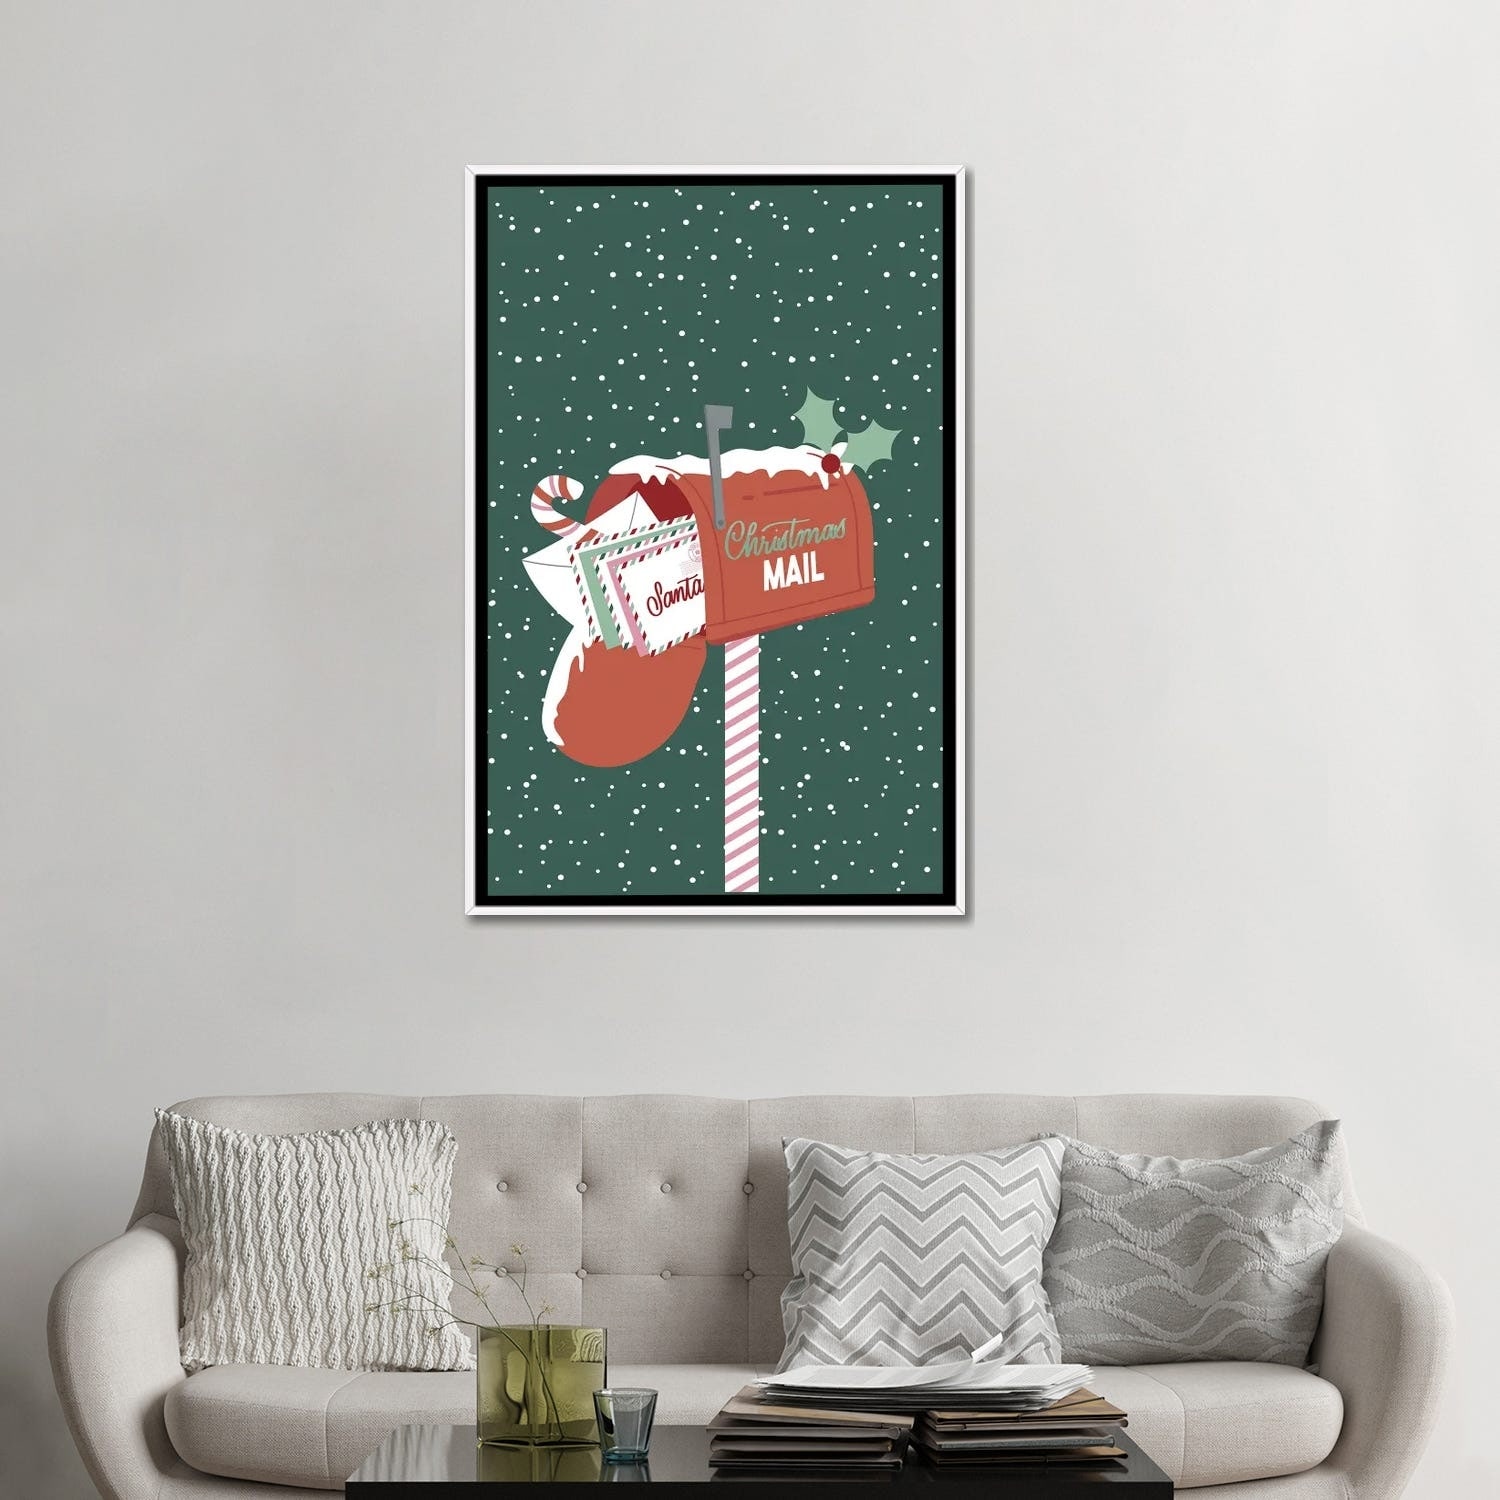 https://ak1.ostkcdn.com/images/products/is/images/direct/b917b820574c05ef05e5f2004b5de63c35a6c60c/iCanvas-%22Christmas-Mail%22-by-Angela-Nickeas-Framed.jpg